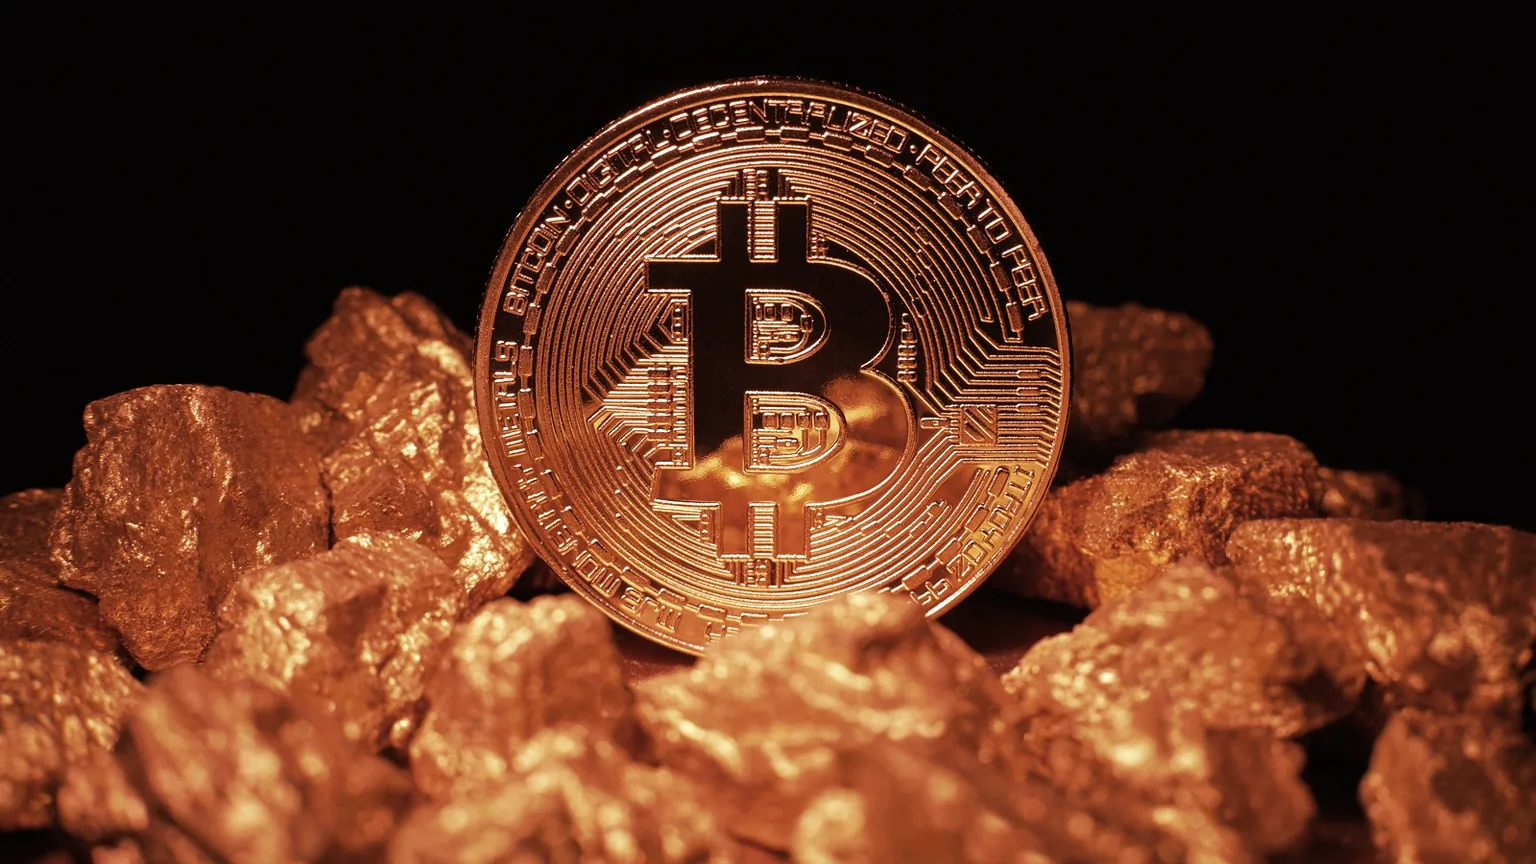 Bitcoin on top of gold. Image: Shutterstock